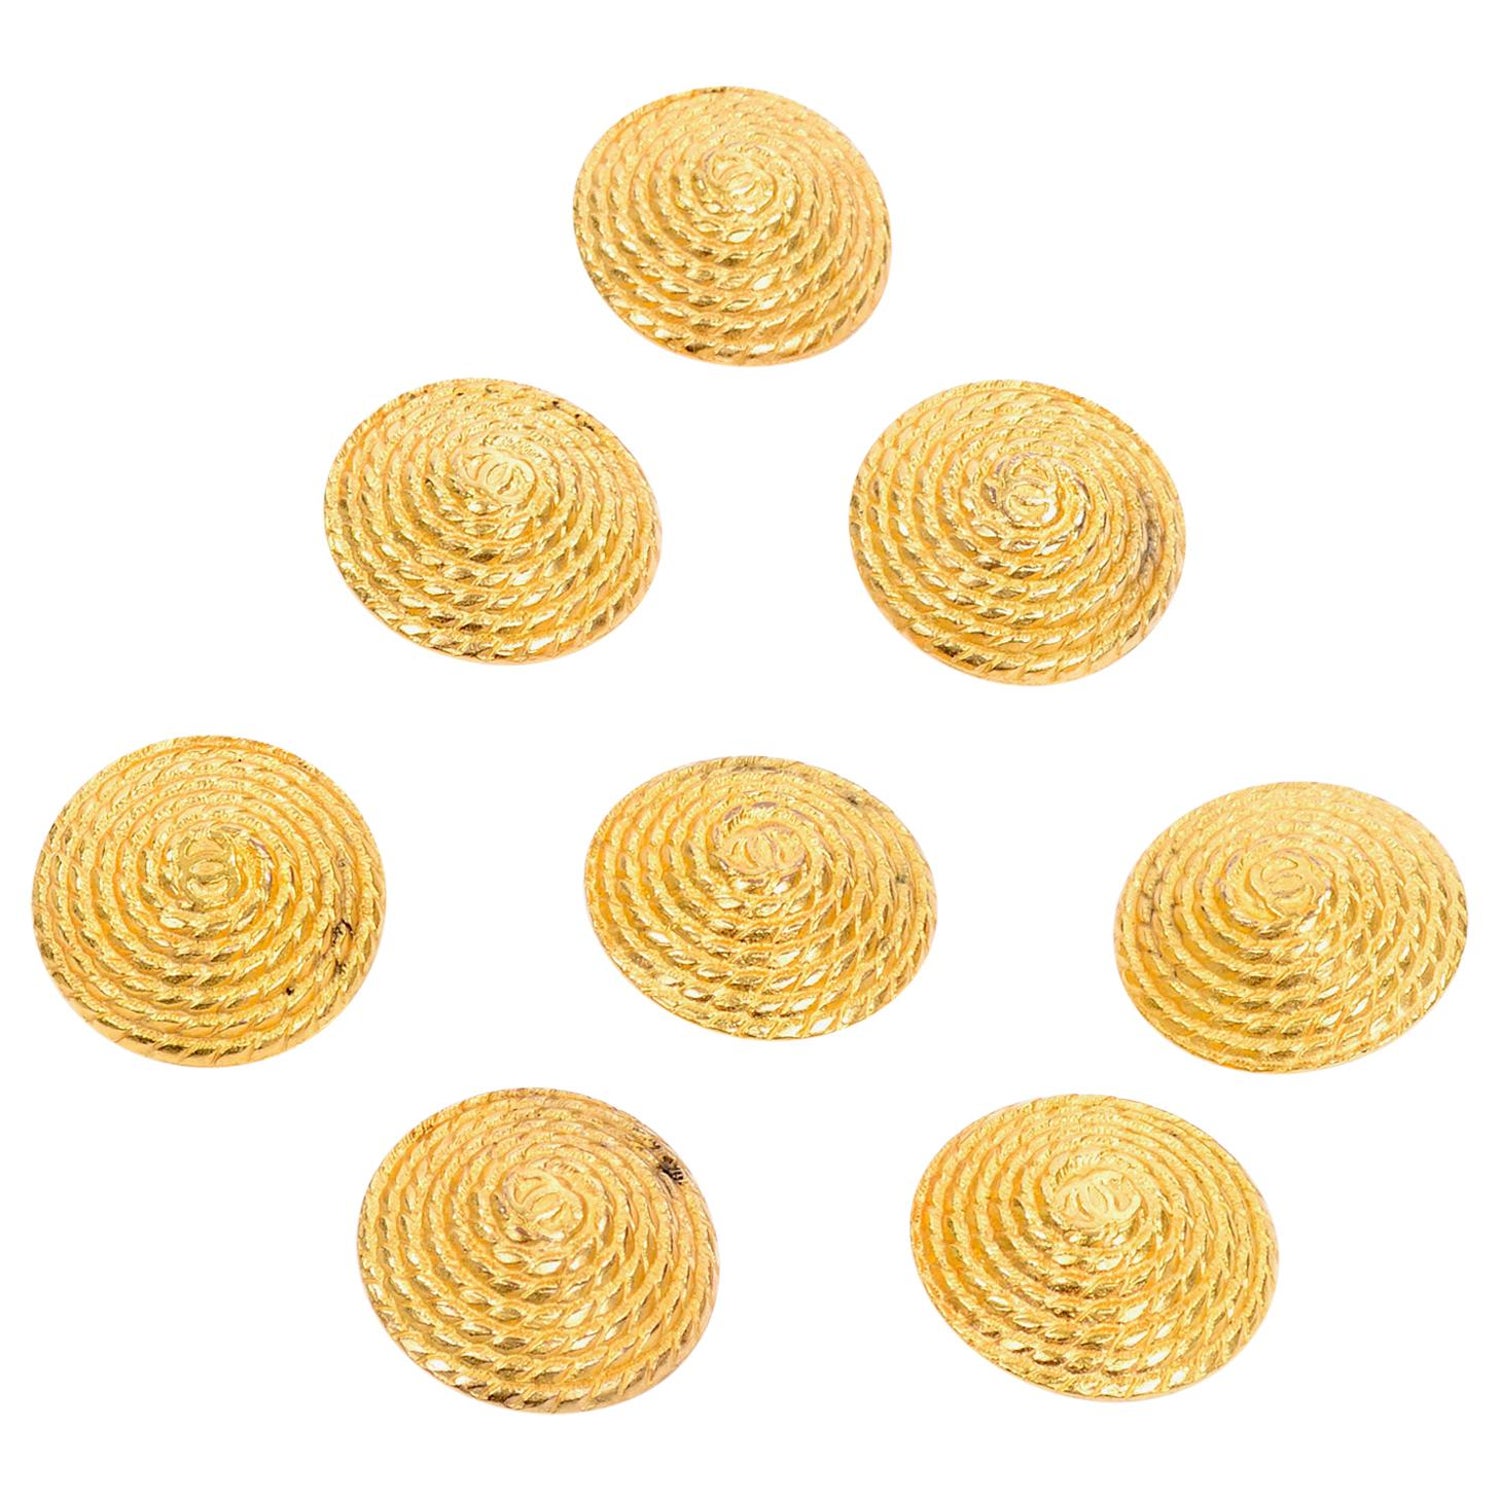 8 Large Vintage Chanel Buttons in Gold W CC Monogram in twisted